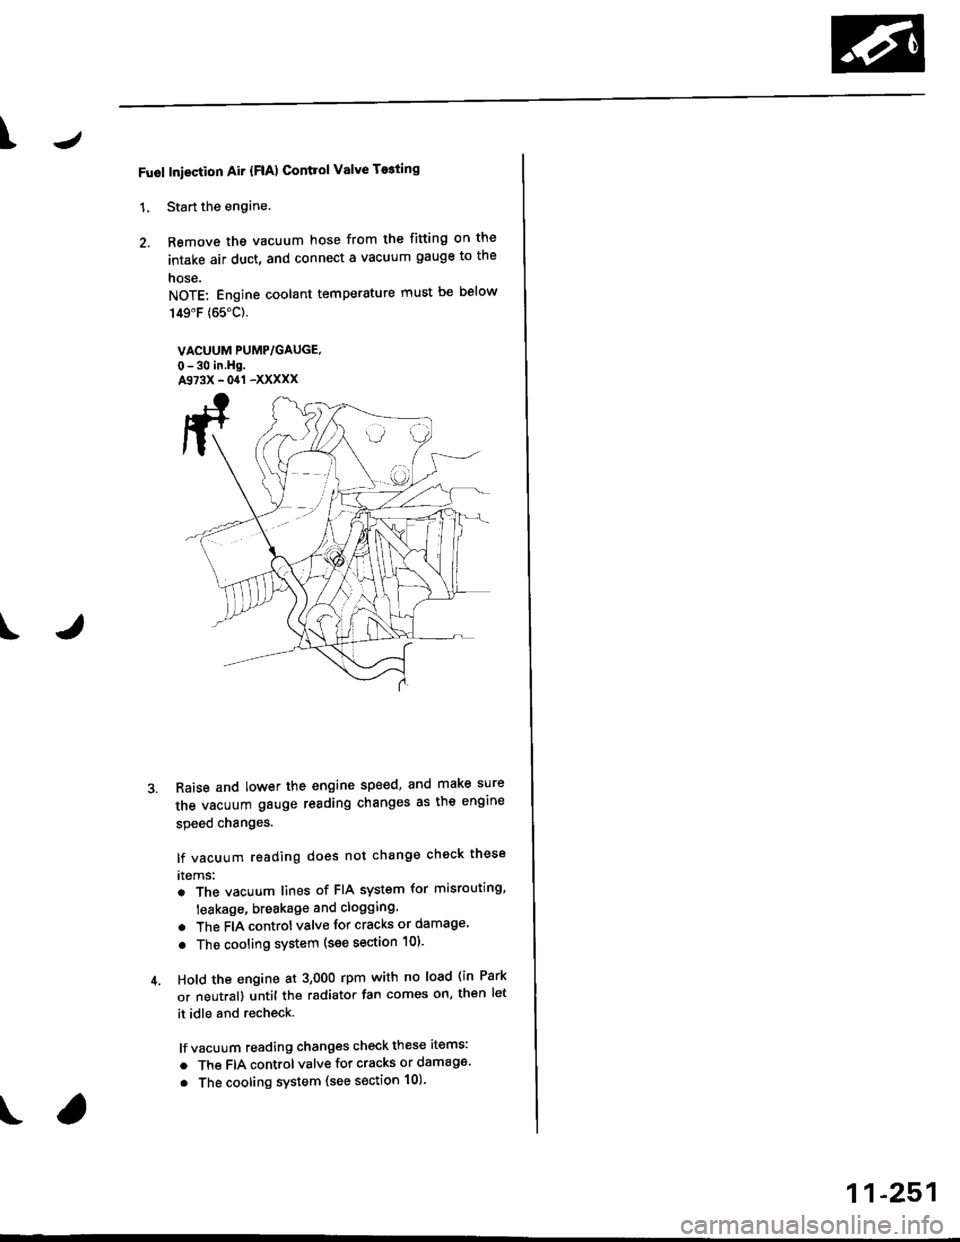 HONDA CIVIC 1999 6.G Workshop Manual \J
Fuol Iniection Air {FlA) Contlol Valve T$ting
1. Start the engine.
2. Remove the vacuum hose from the fitting on the
intake air duct, and connect a vacuum gauge to the
nose.
NOTE: Engine coolant te